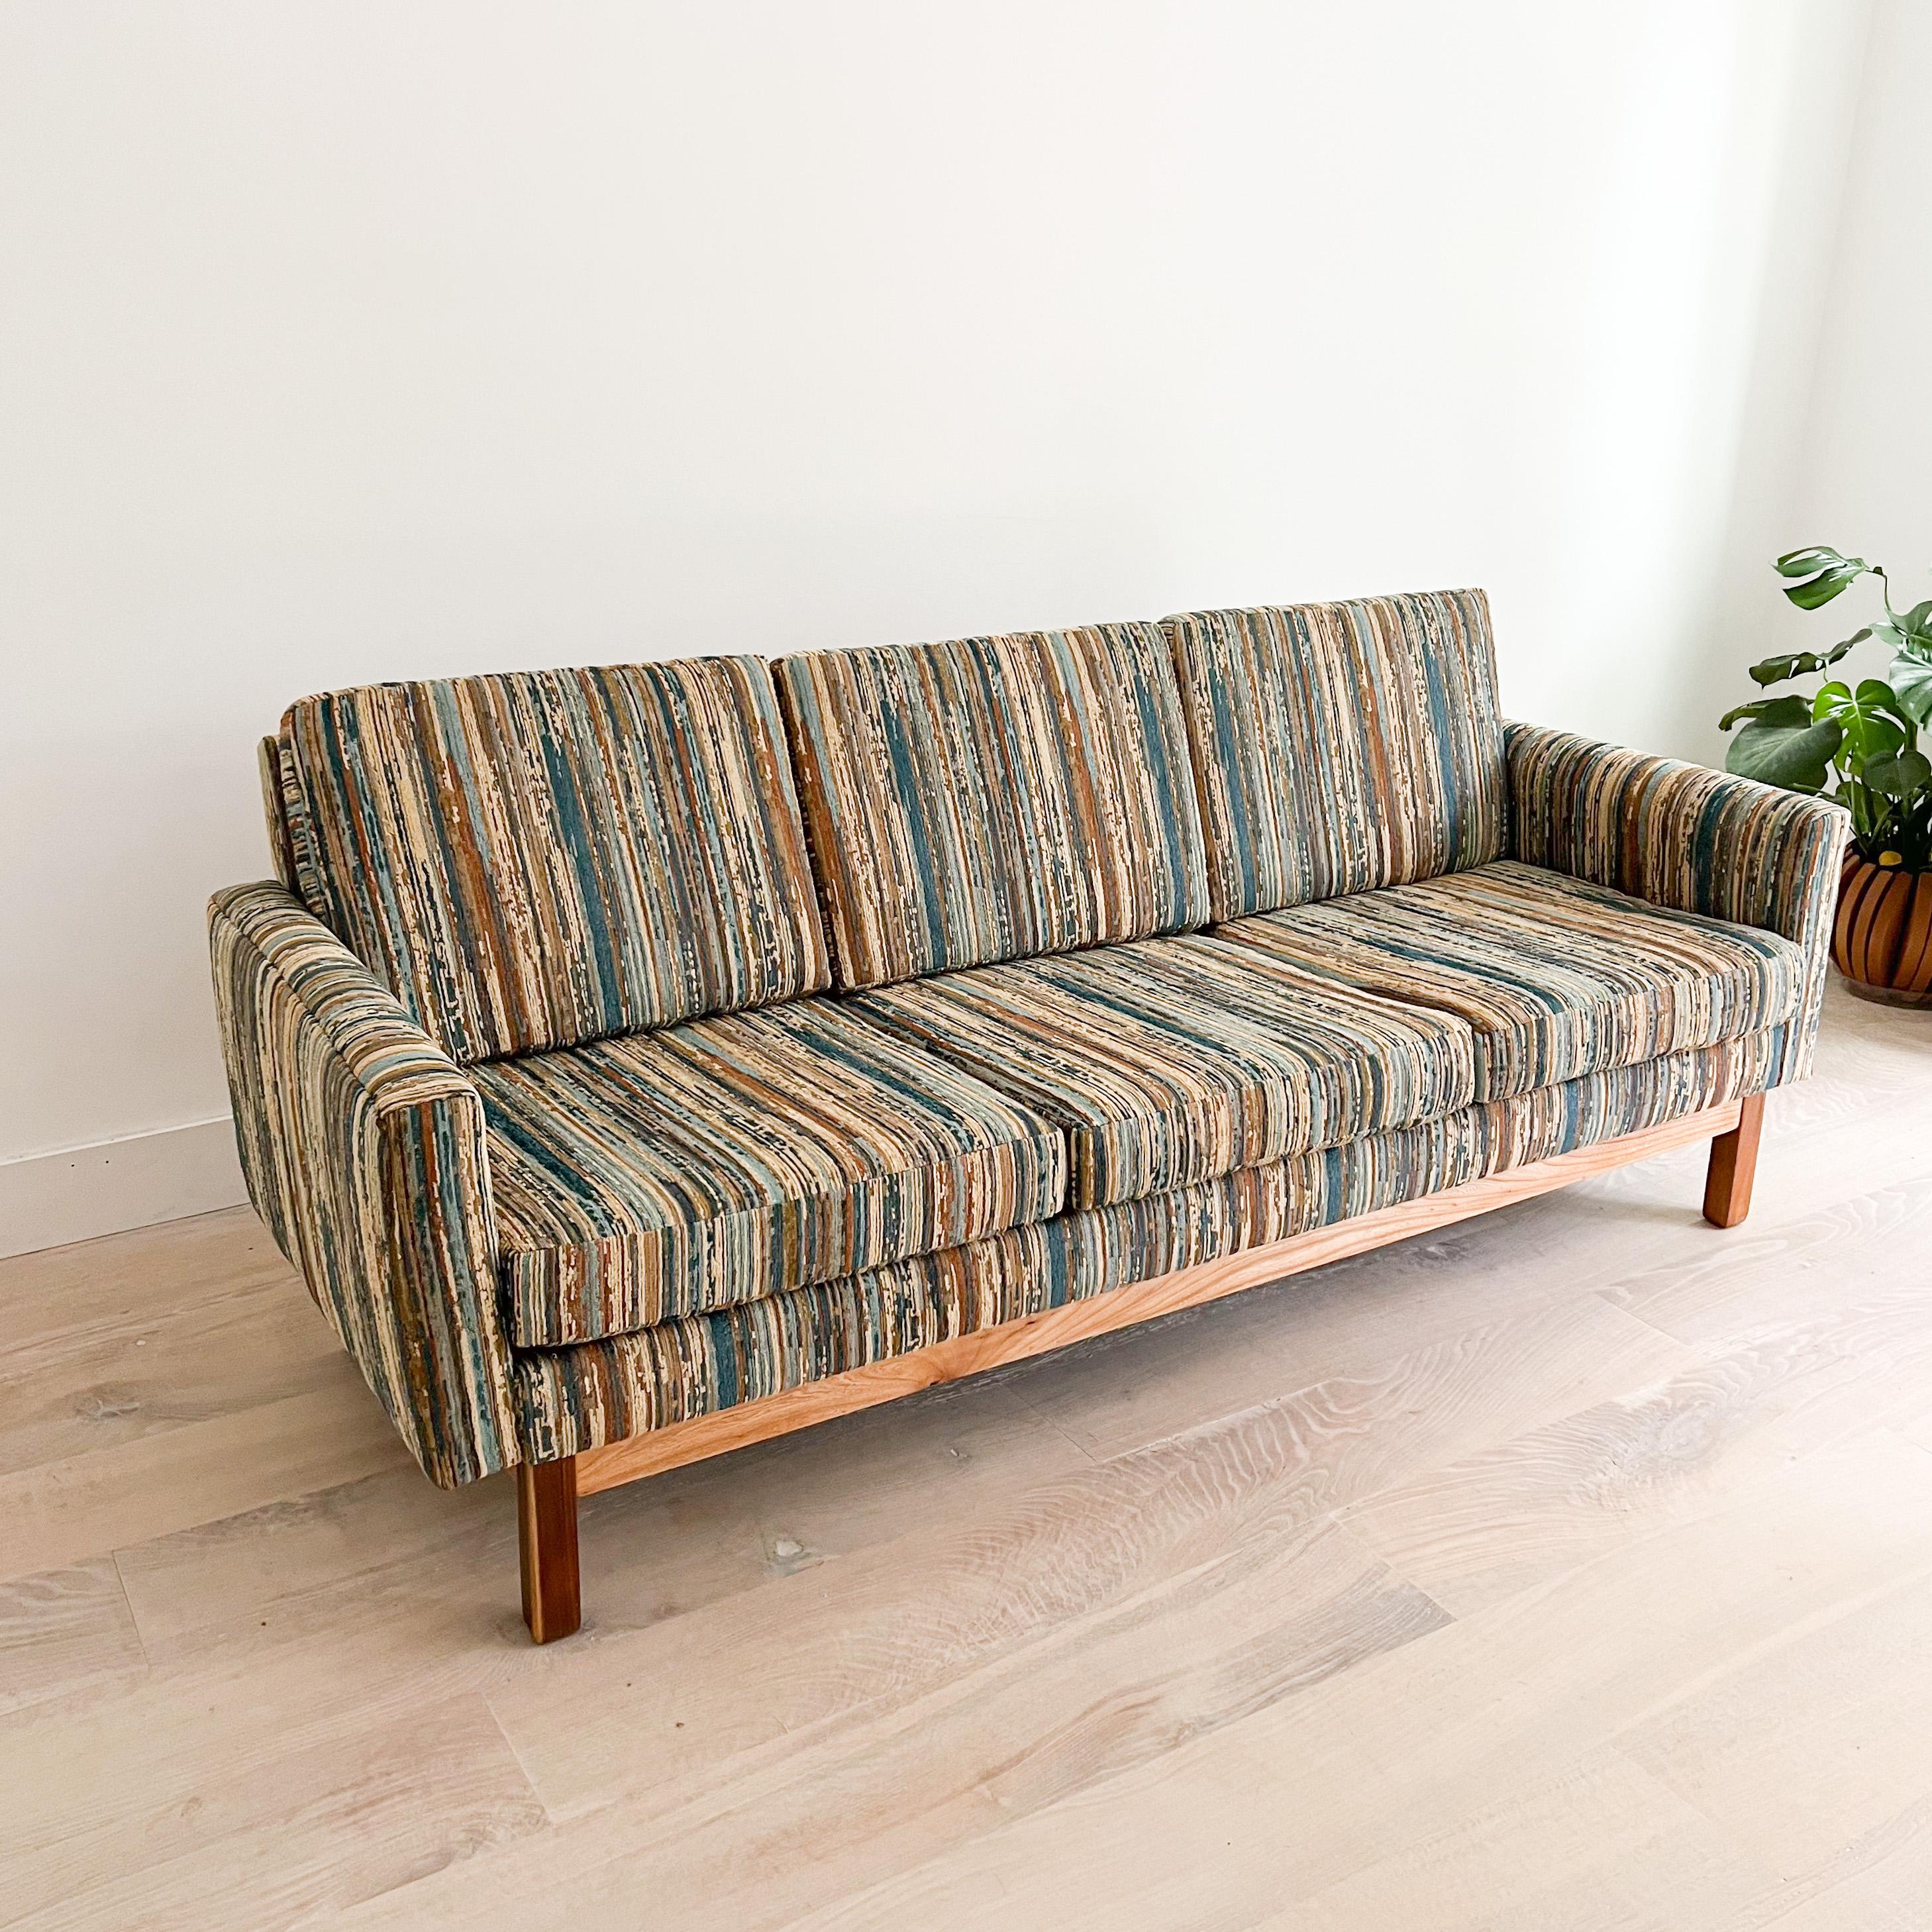 Mid-Century Modern three seater sofa. Refinished walnut and oak base. New foam and earth tone vintage style upholstery.
 